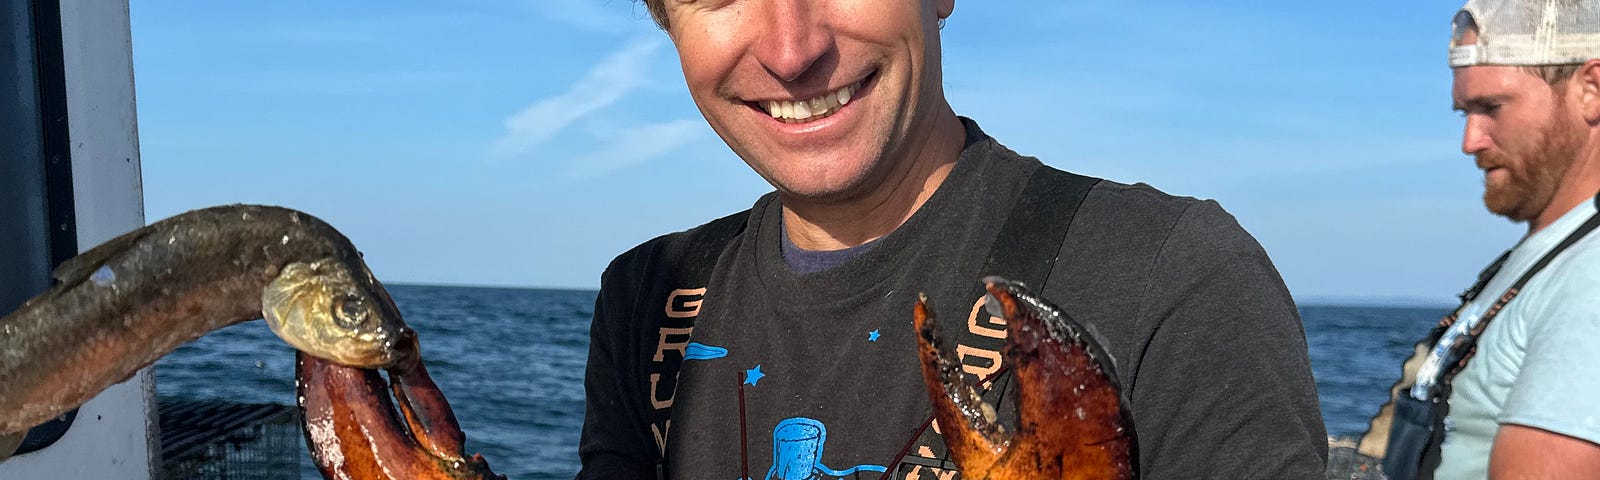 Author is holding a giant lobster. he is wearing soiled working overalls and gloves. A pile of pigskins is to the side — it will be used for bait.